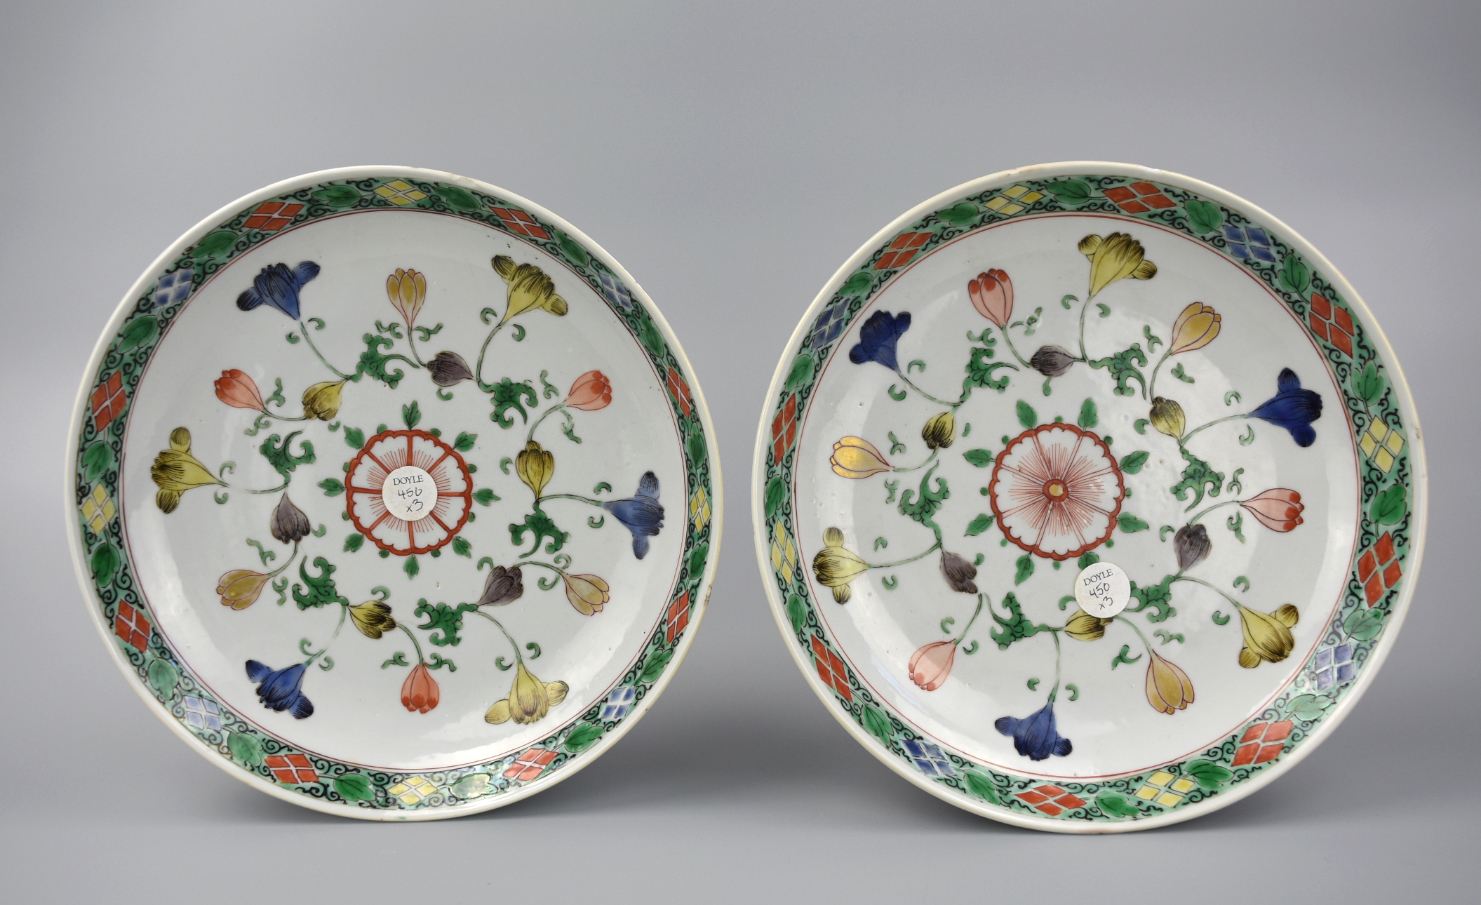 PAIR OF CHINESE WUCAI FLORAL PLATES  2cf464